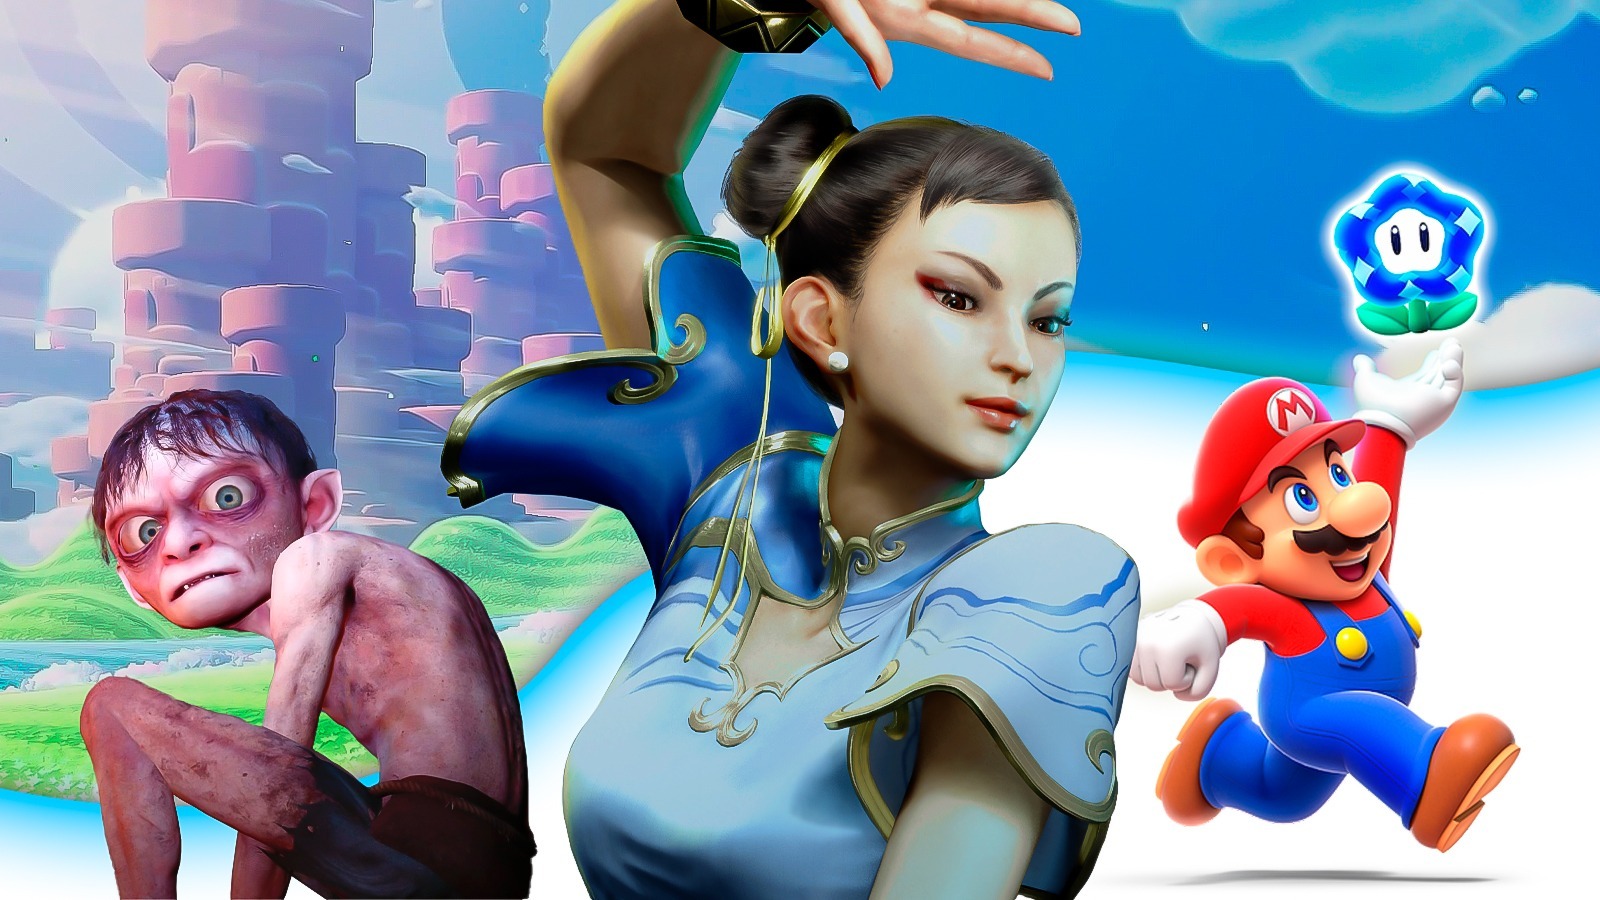 The 10 Best Video Games of 2023